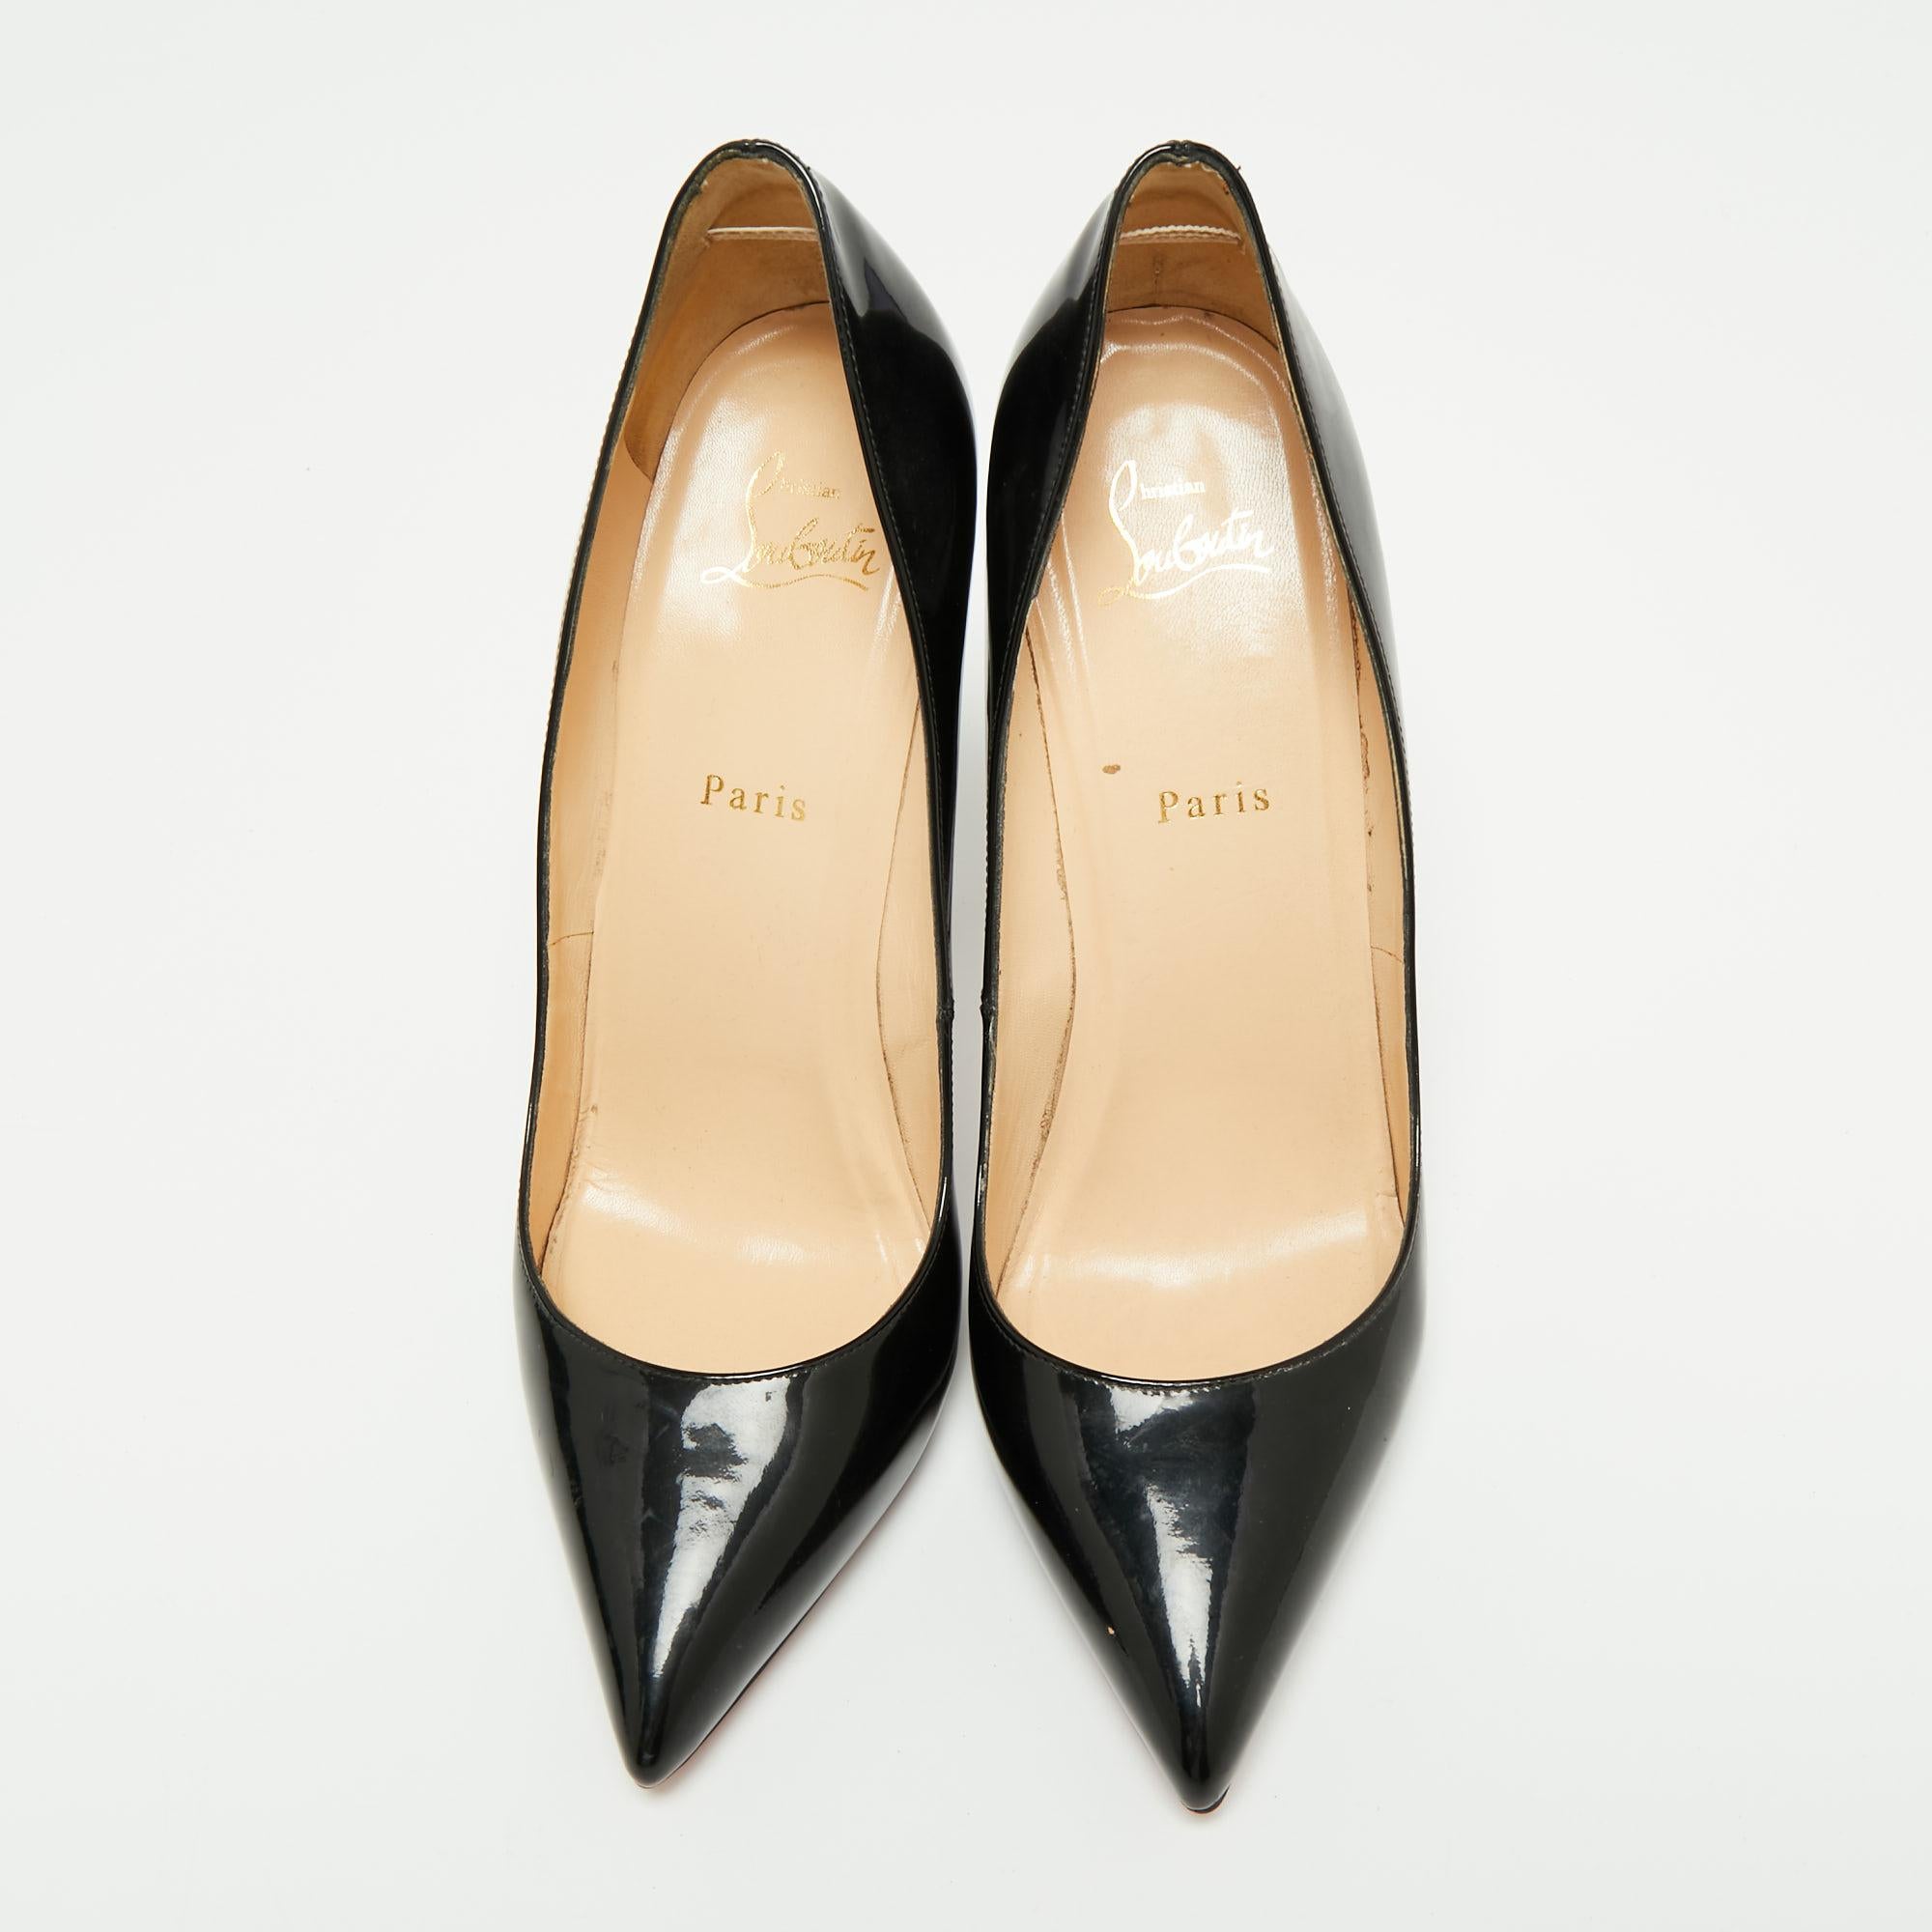 These black pumps from Christian Louboutin are meant to be a loved choice. Carefully formed using patent leather, and balanced on 13 cm heels, the CL pumps will lift your feet in a stunning manner.

